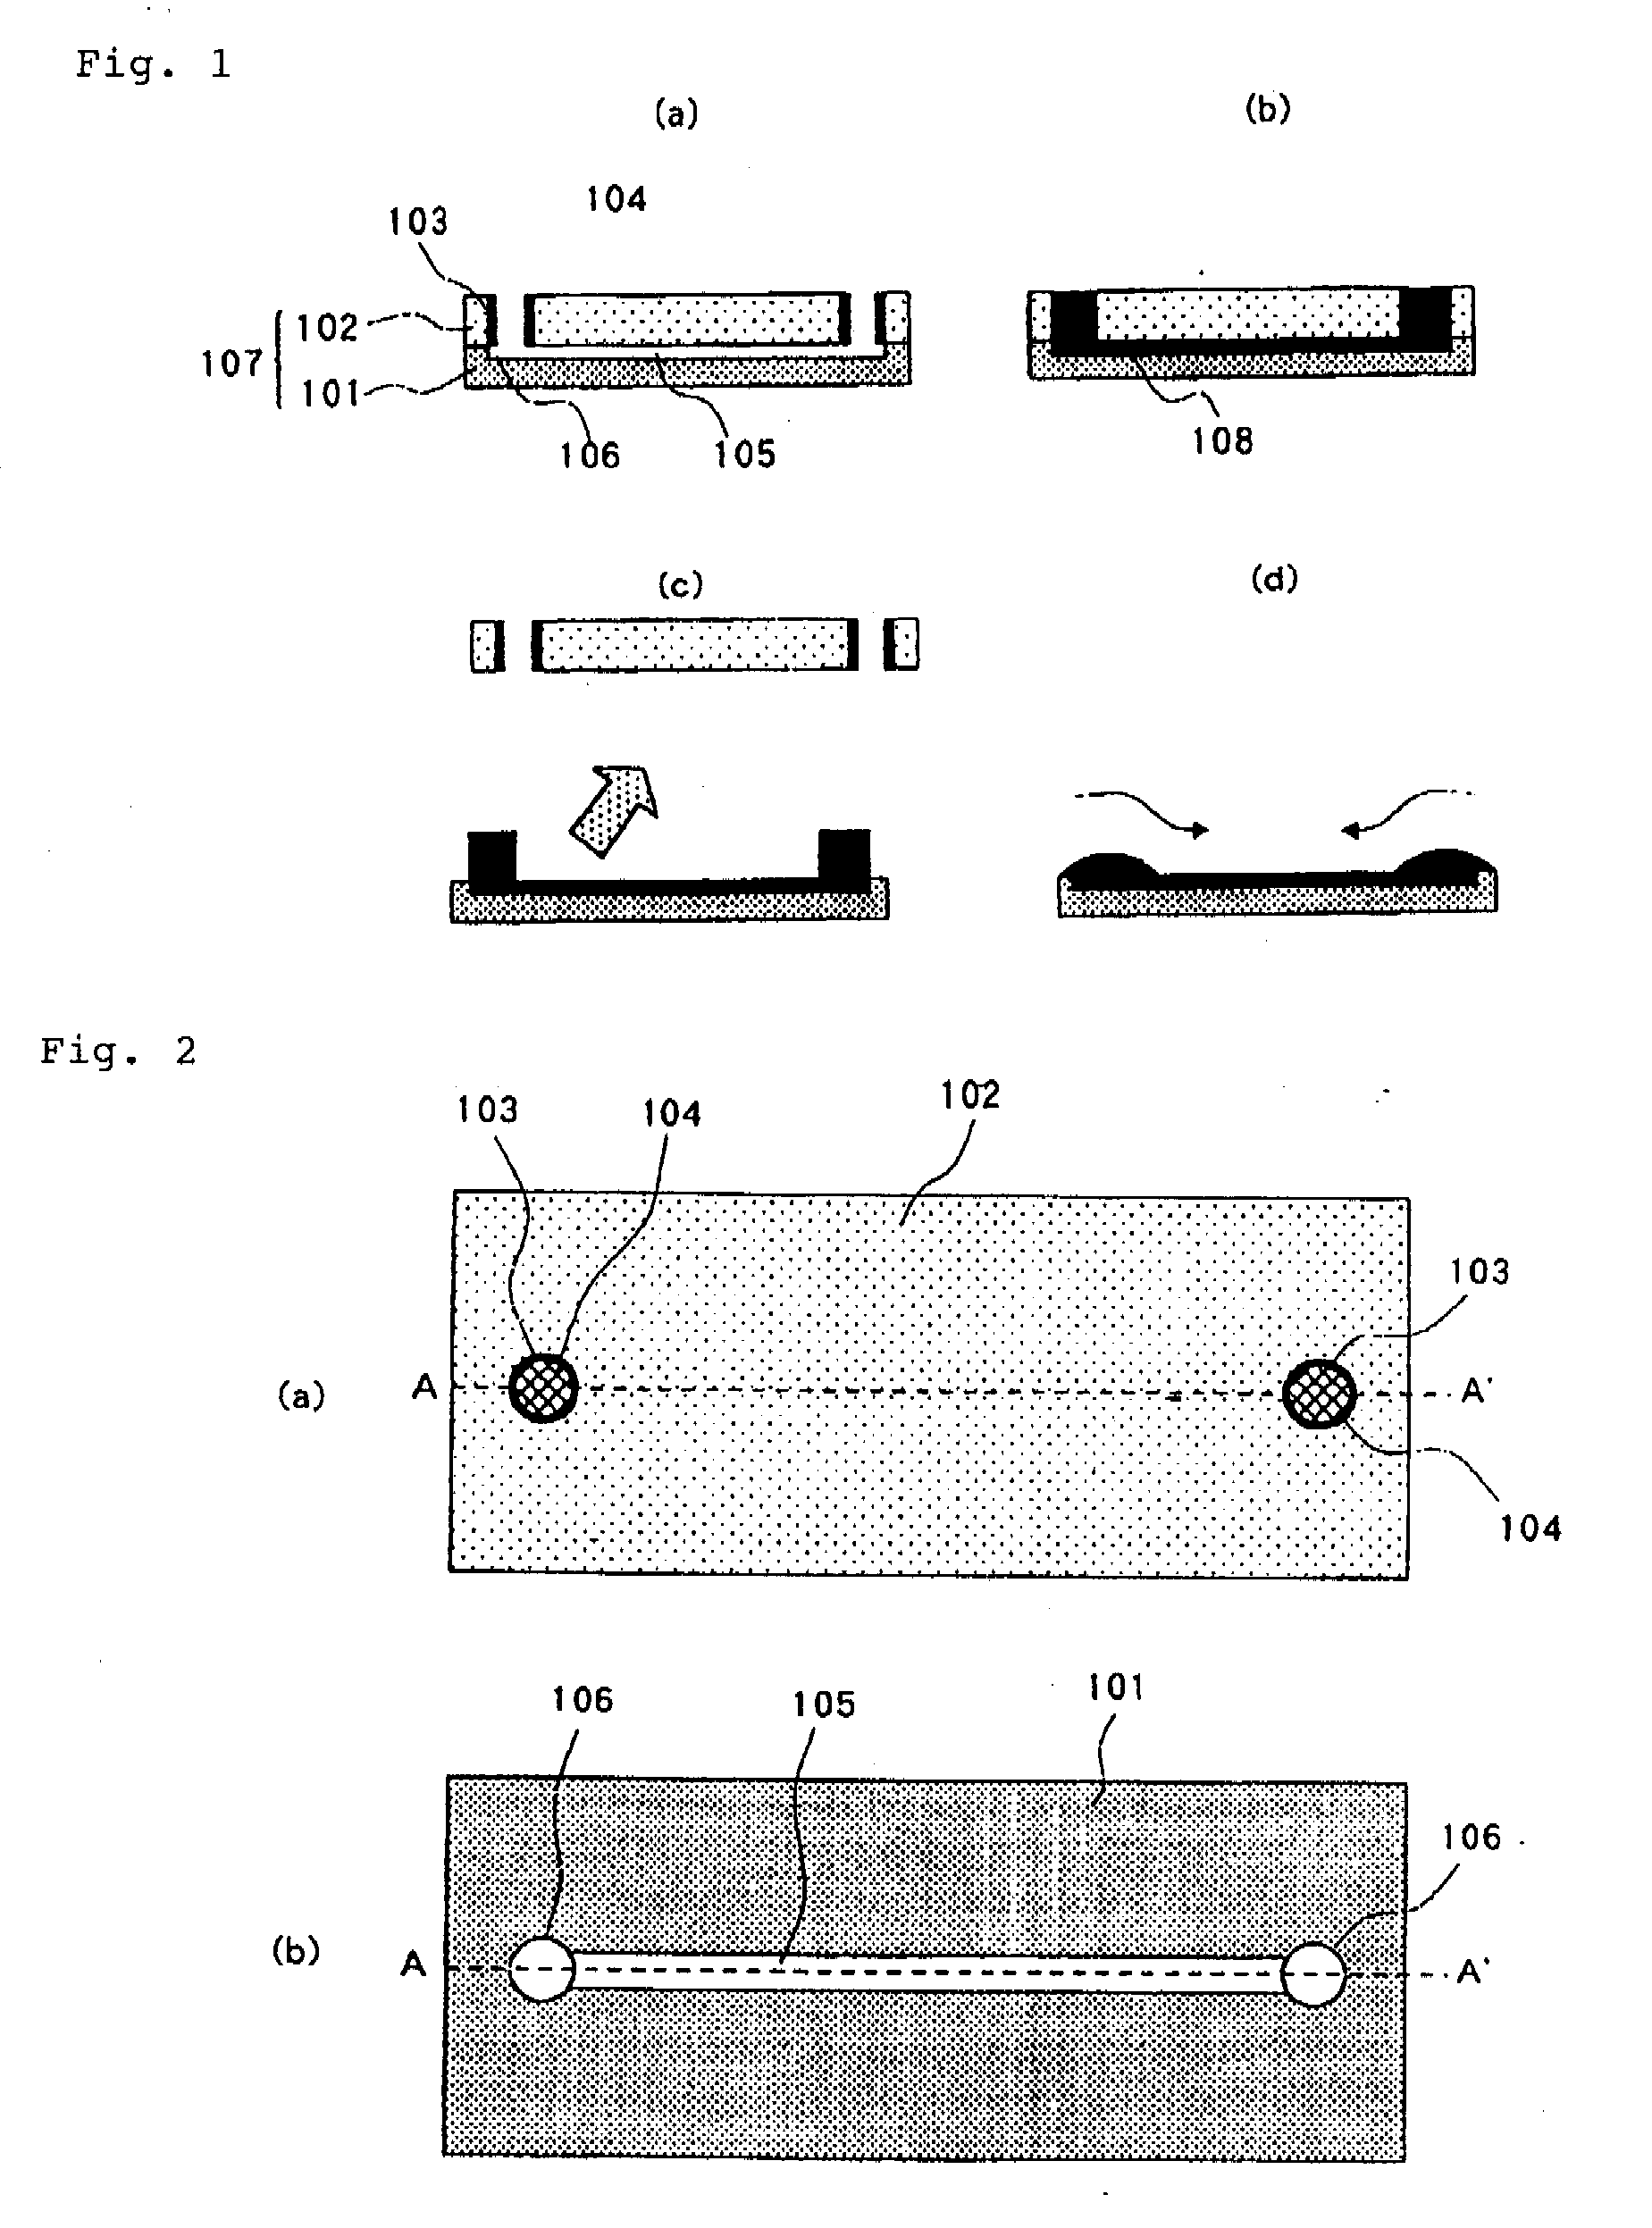 Microchip and analysis method using the microchip